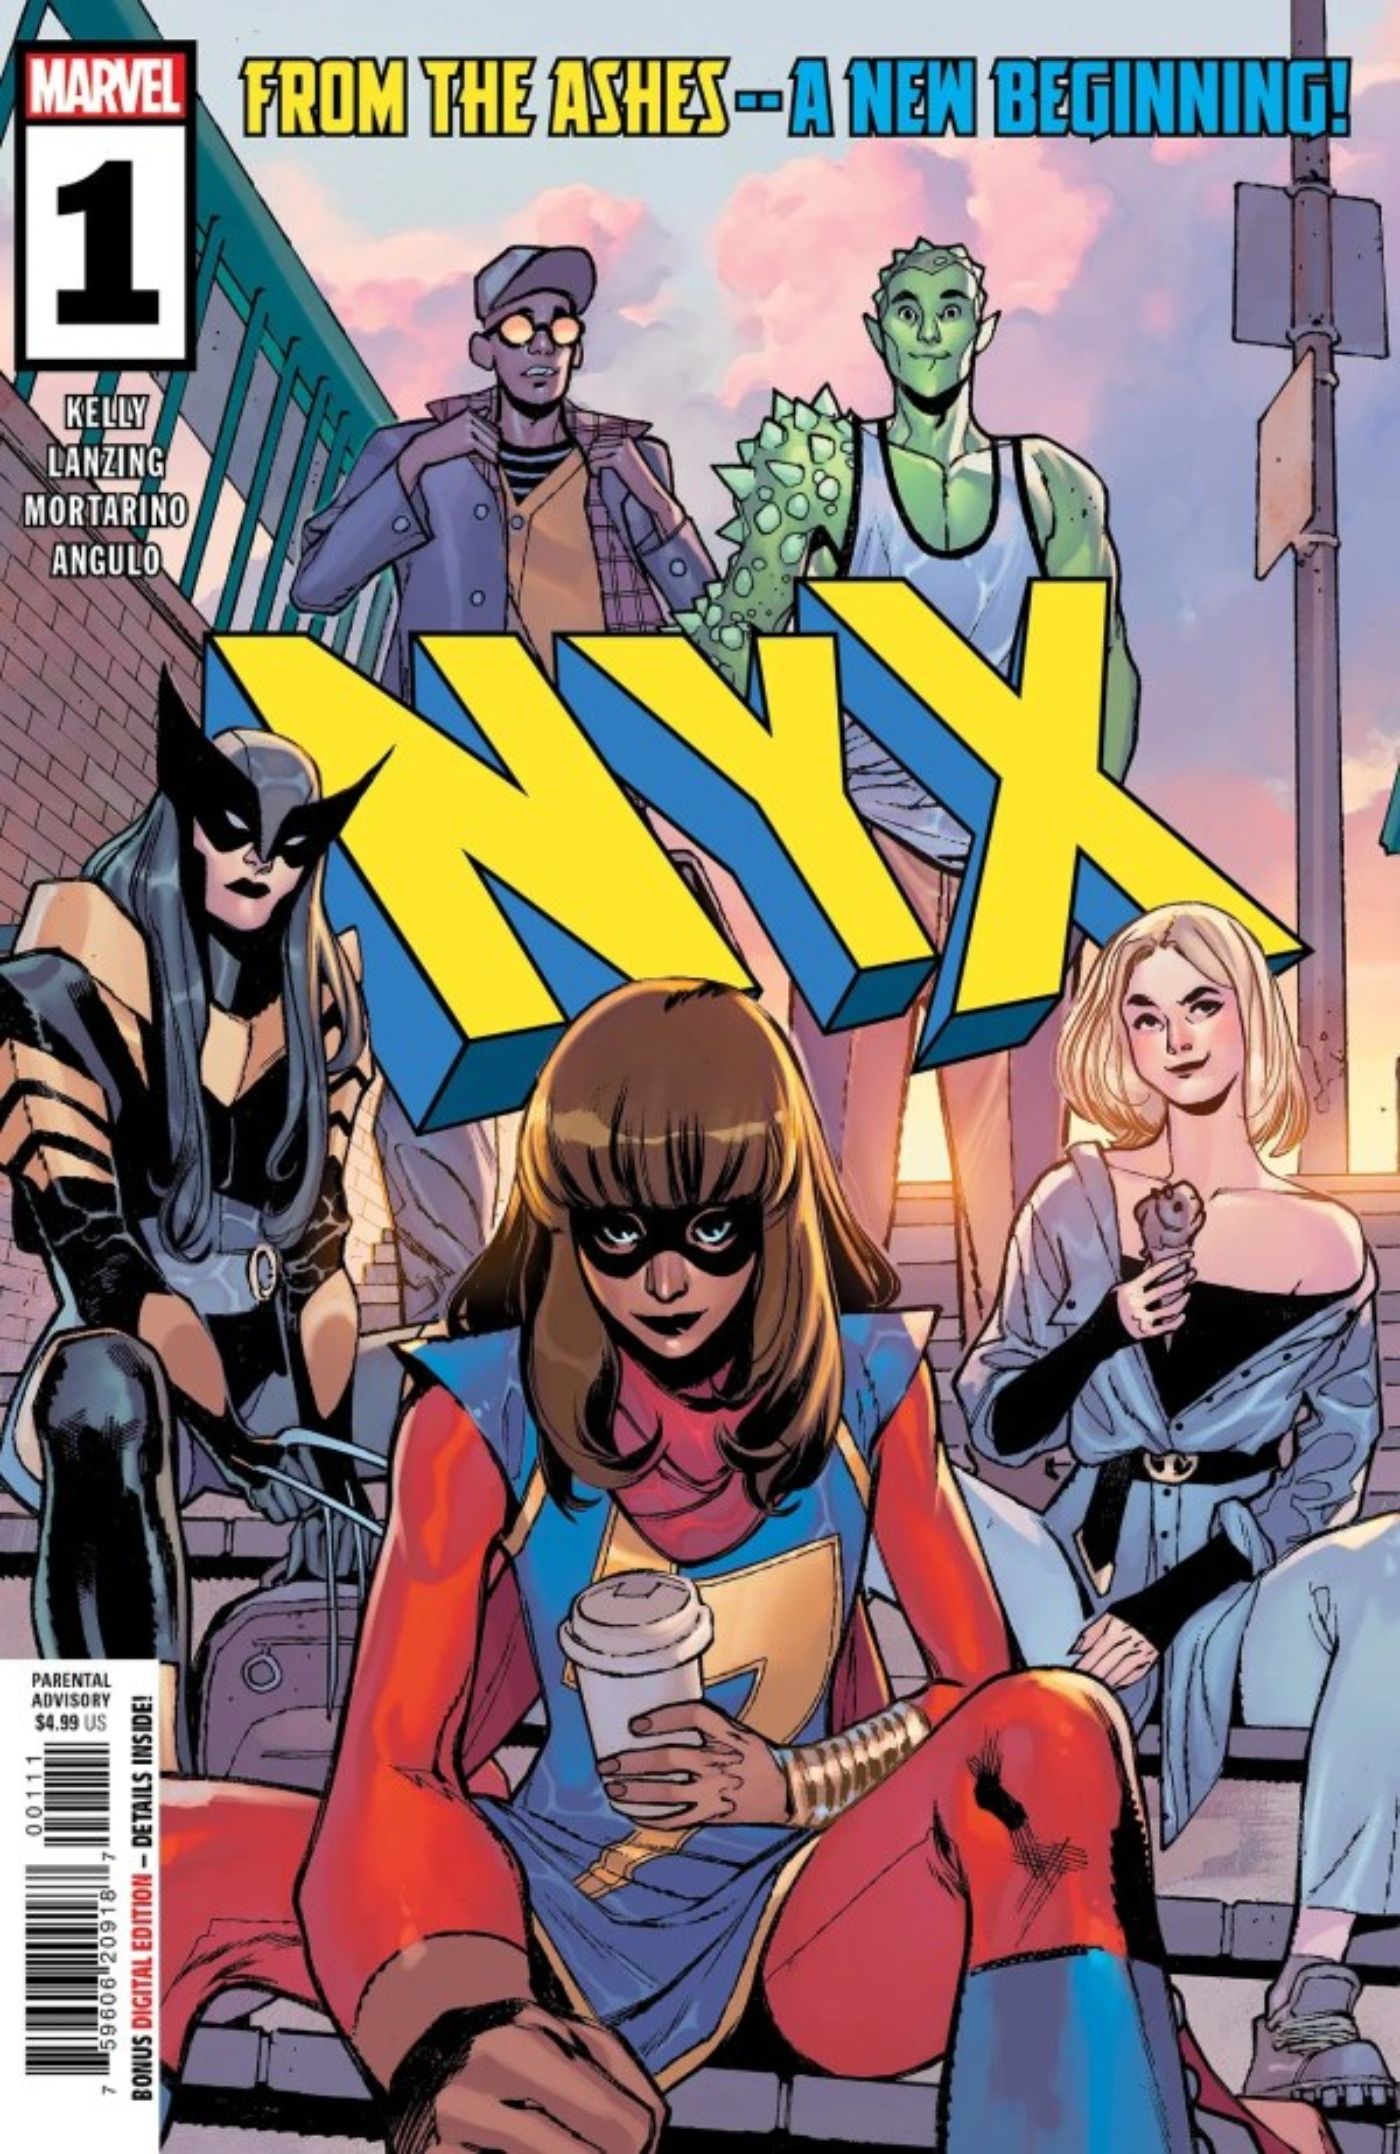 NYX #1 cover featuring Laura Kinney, Kamala Khan, and others.